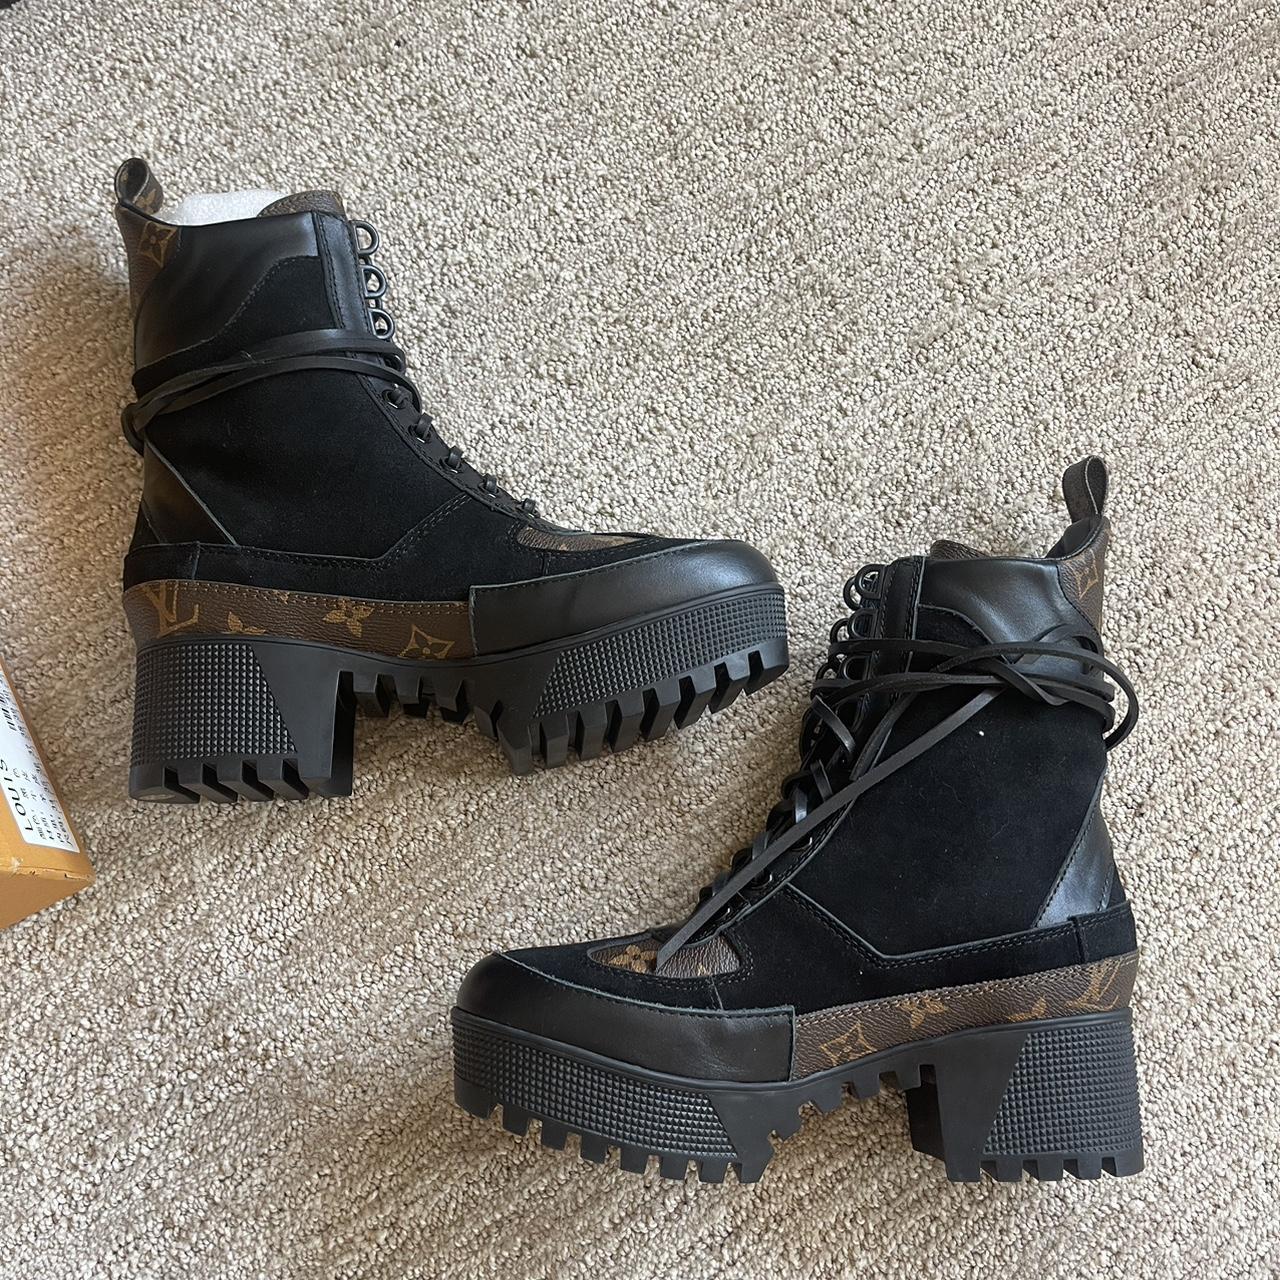 Louis Vuitton Pre-owned Women's Leather Boots